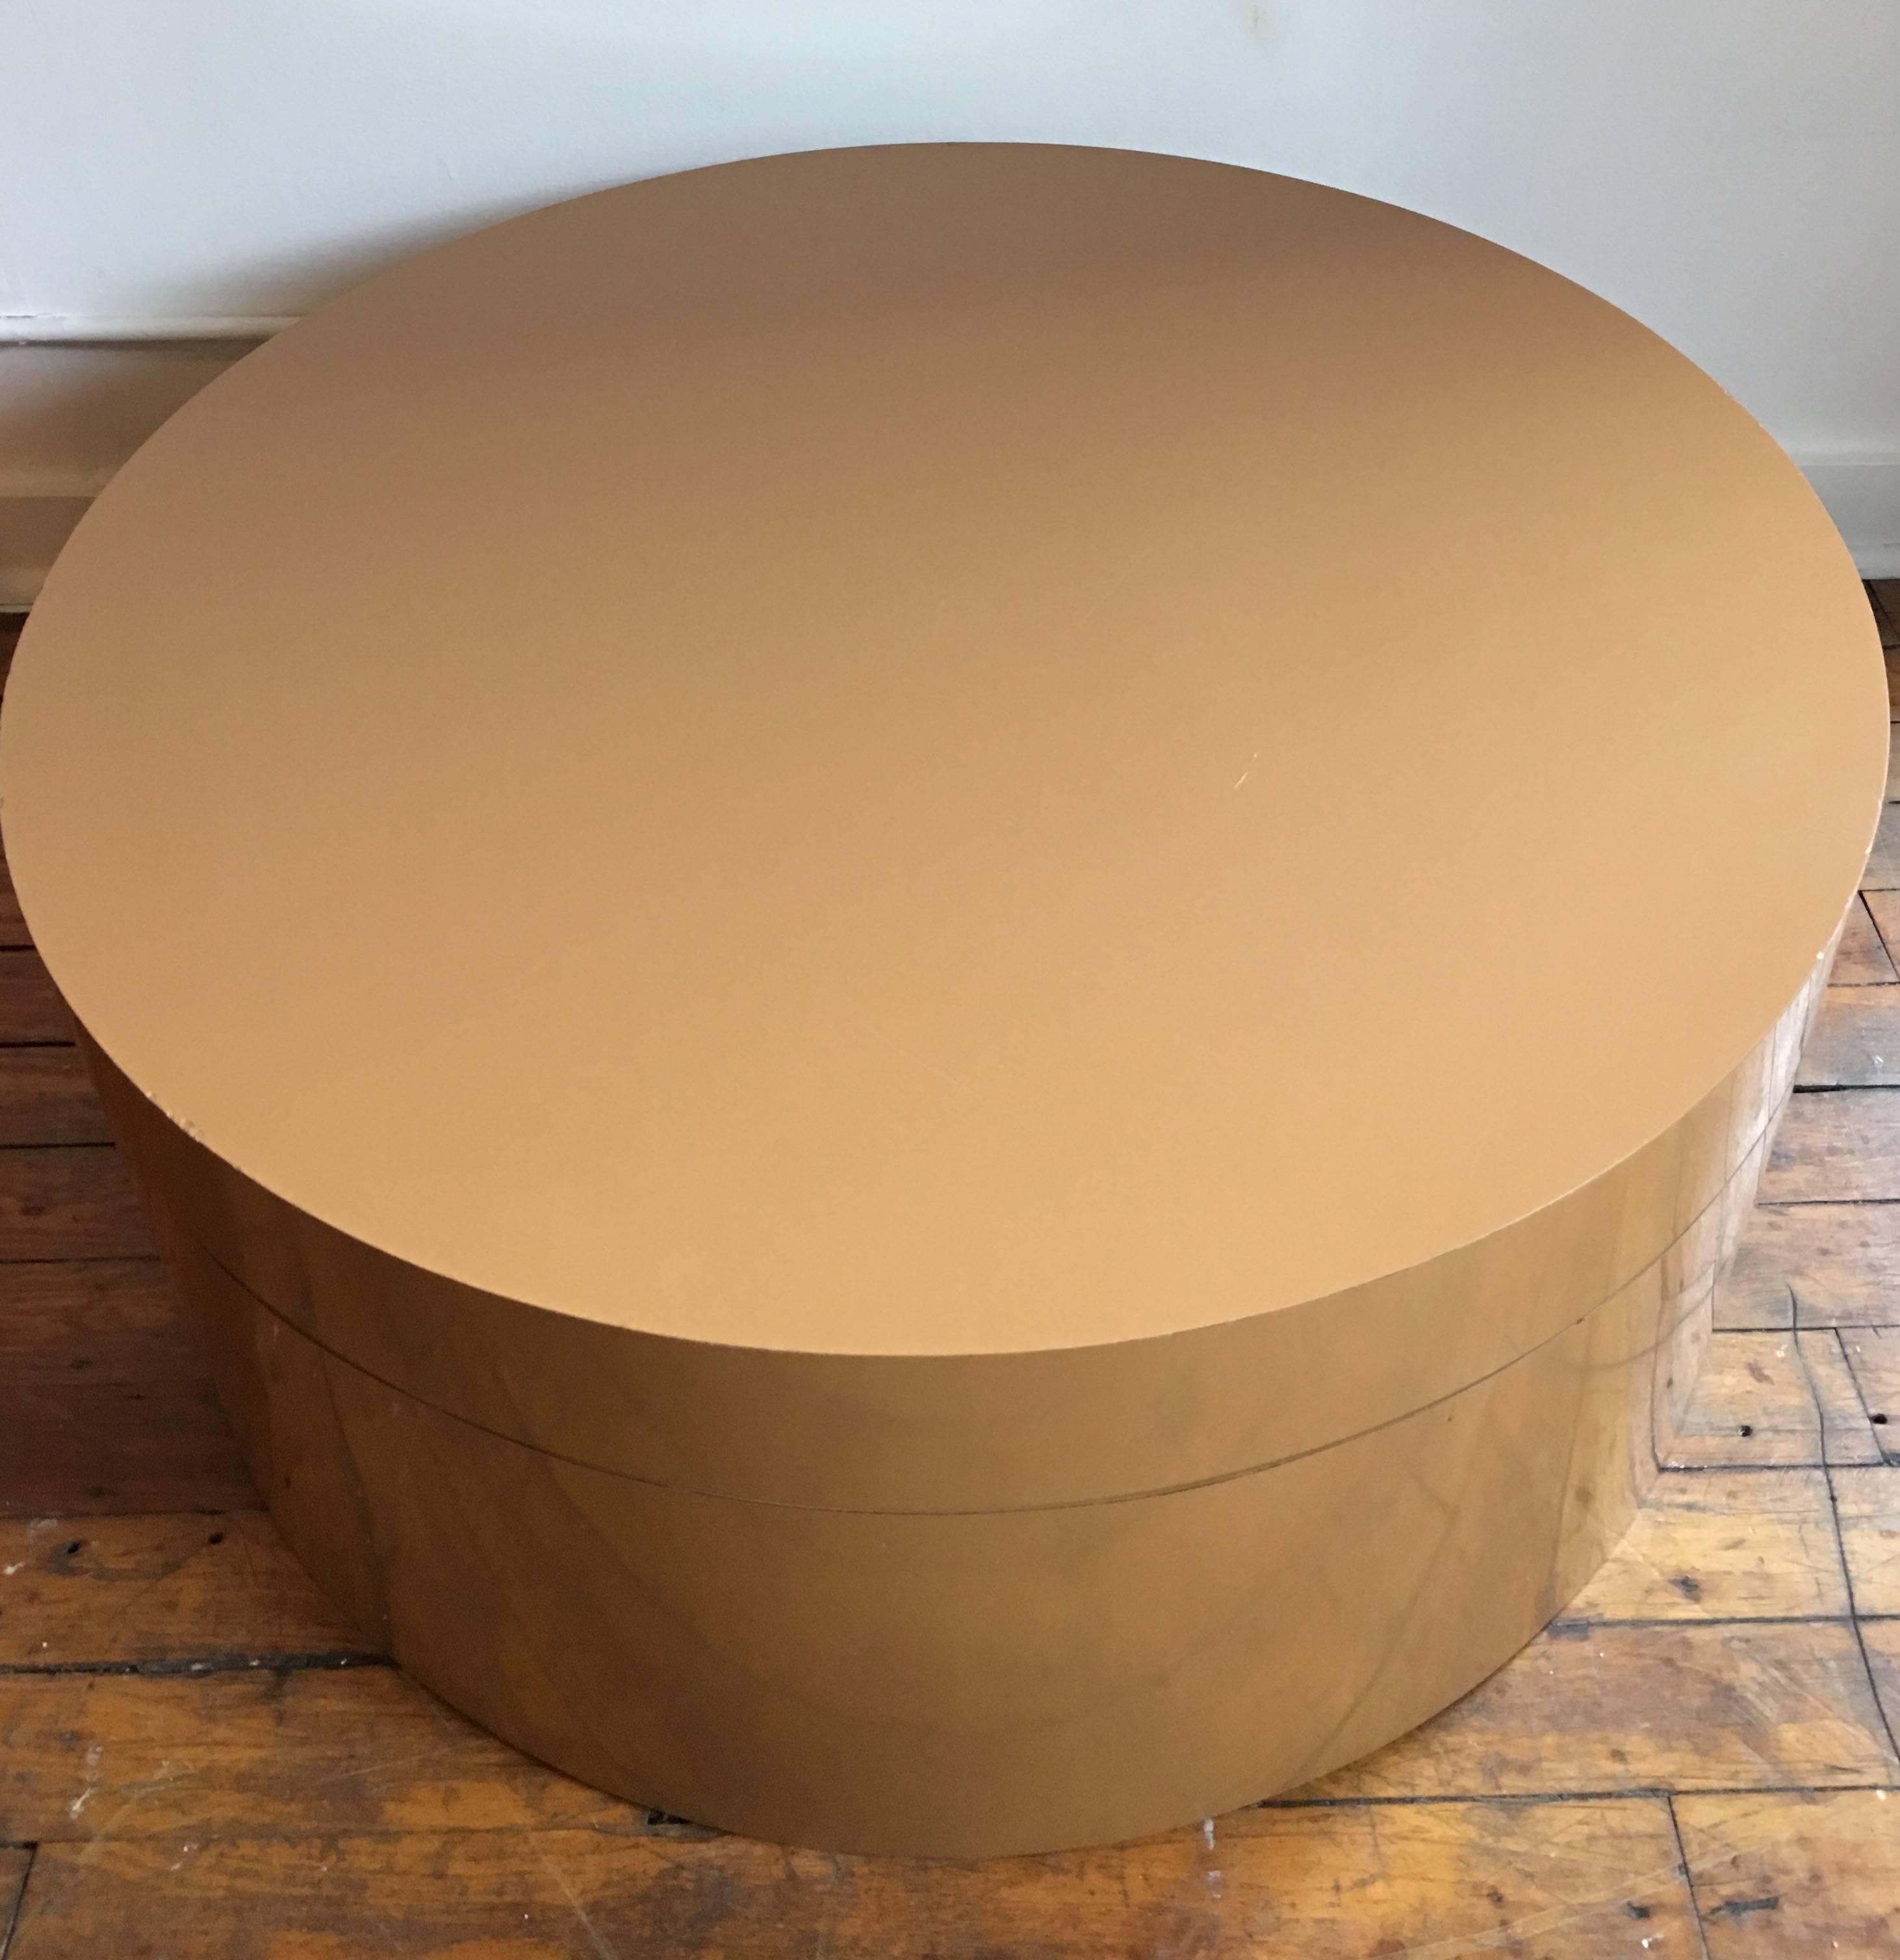 Large round Mid-Century Modern two-tier swivel cocktail table. Top tier can be expanded to reveal two circular tops or remain stacked in a single cylinder/drum shape. Original orange tone wrapped laminate.

Bottom tier measures 12 inches